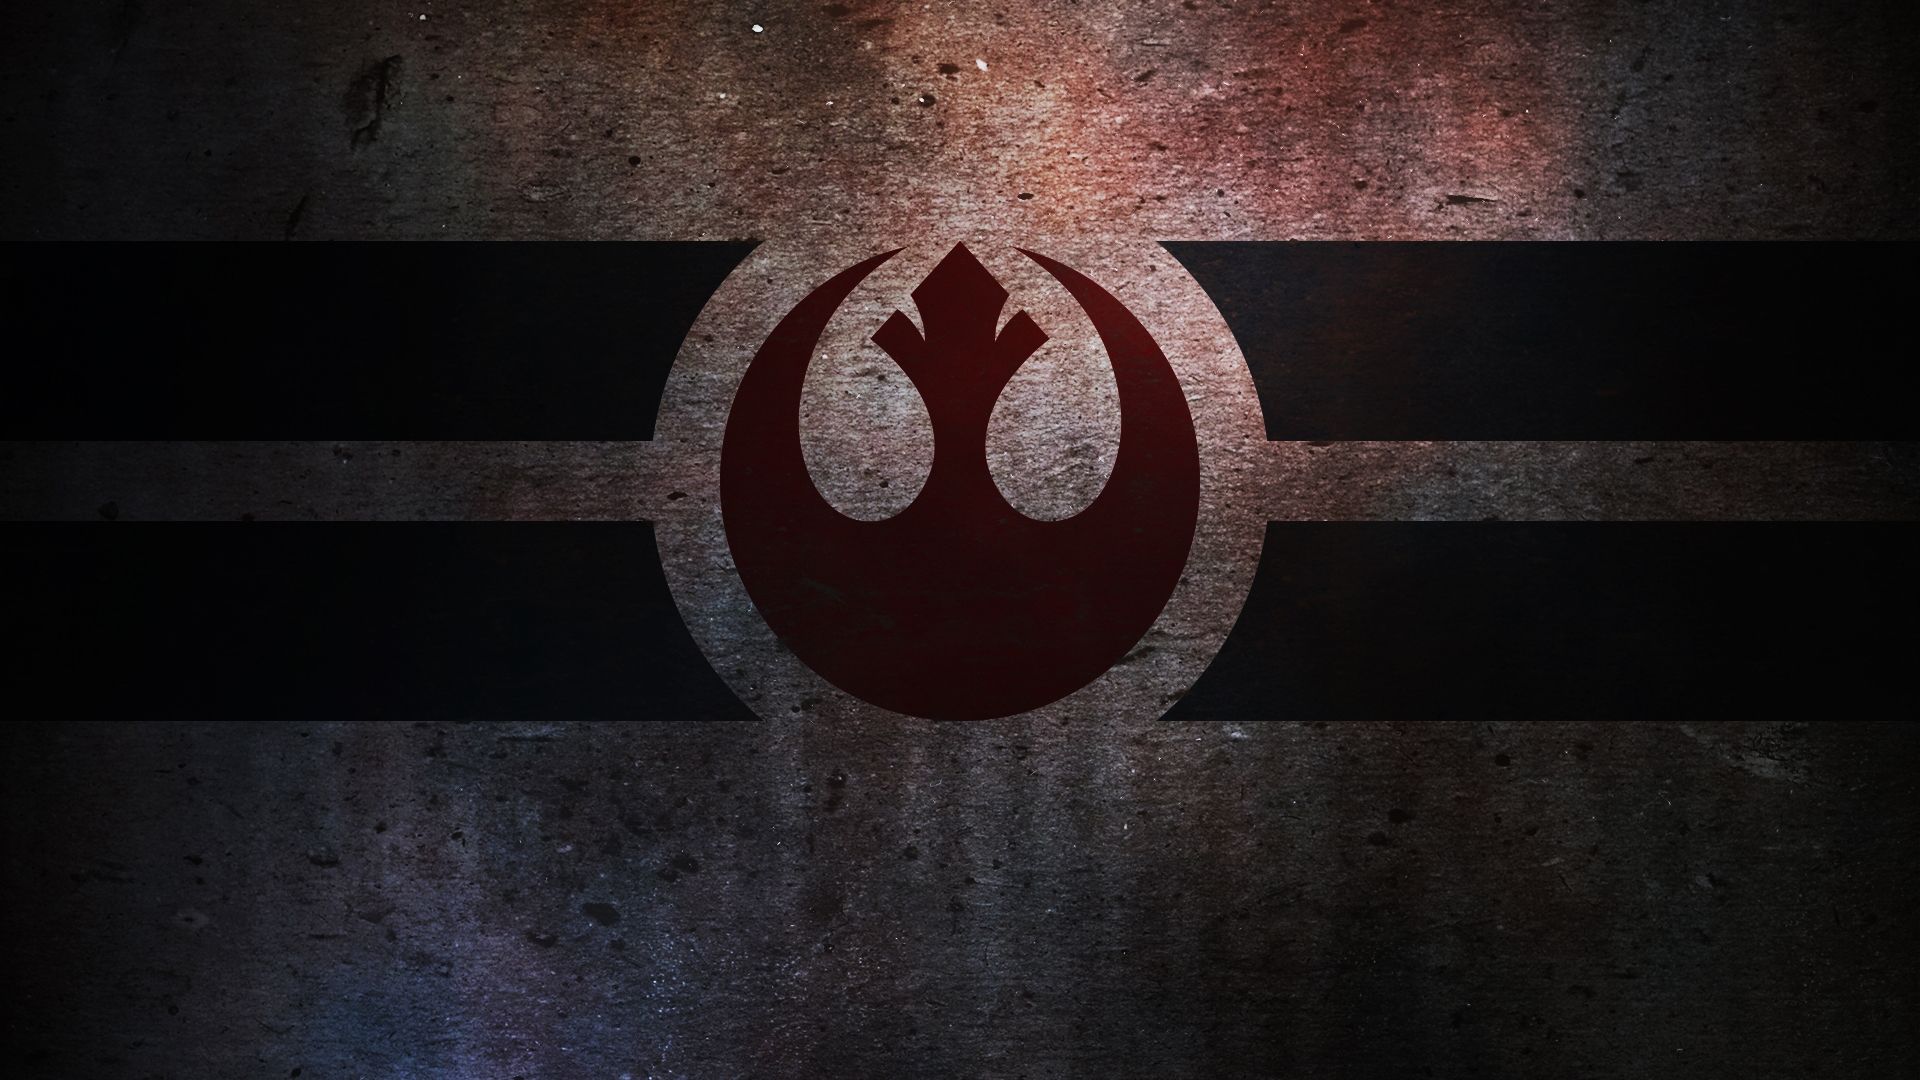 1914 Star Wars HD Wallpapers | Backgrounds - Wallpaper Abyss - Page 10